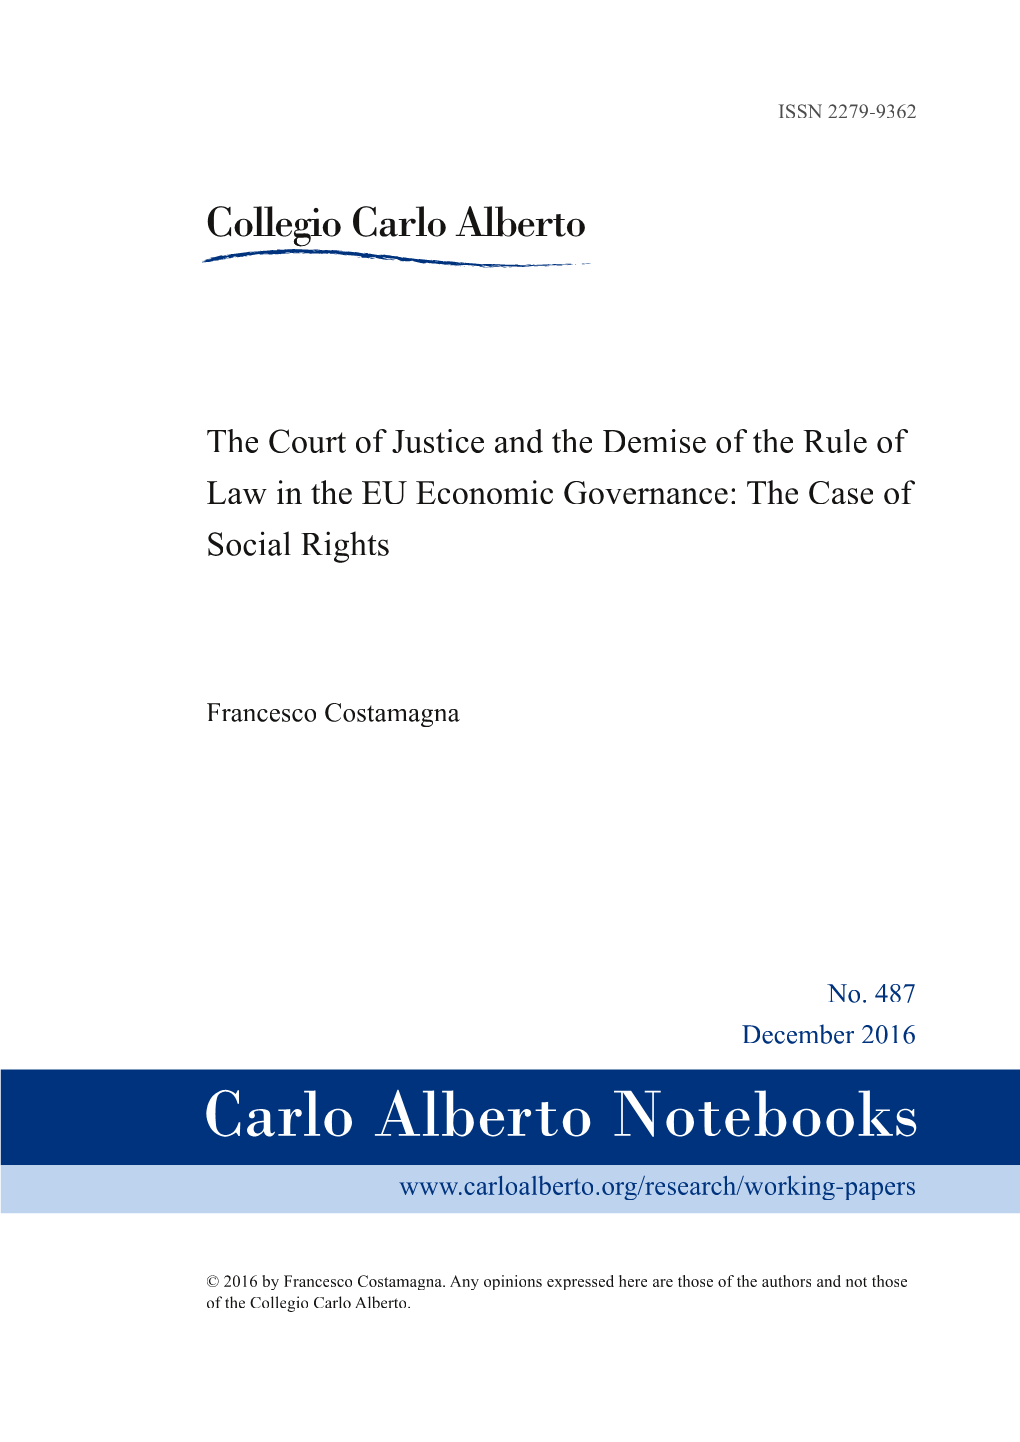 The Court of Justice and the Demise of the Rule of Law in the EU Economic Governance: the Case of Social Rights F